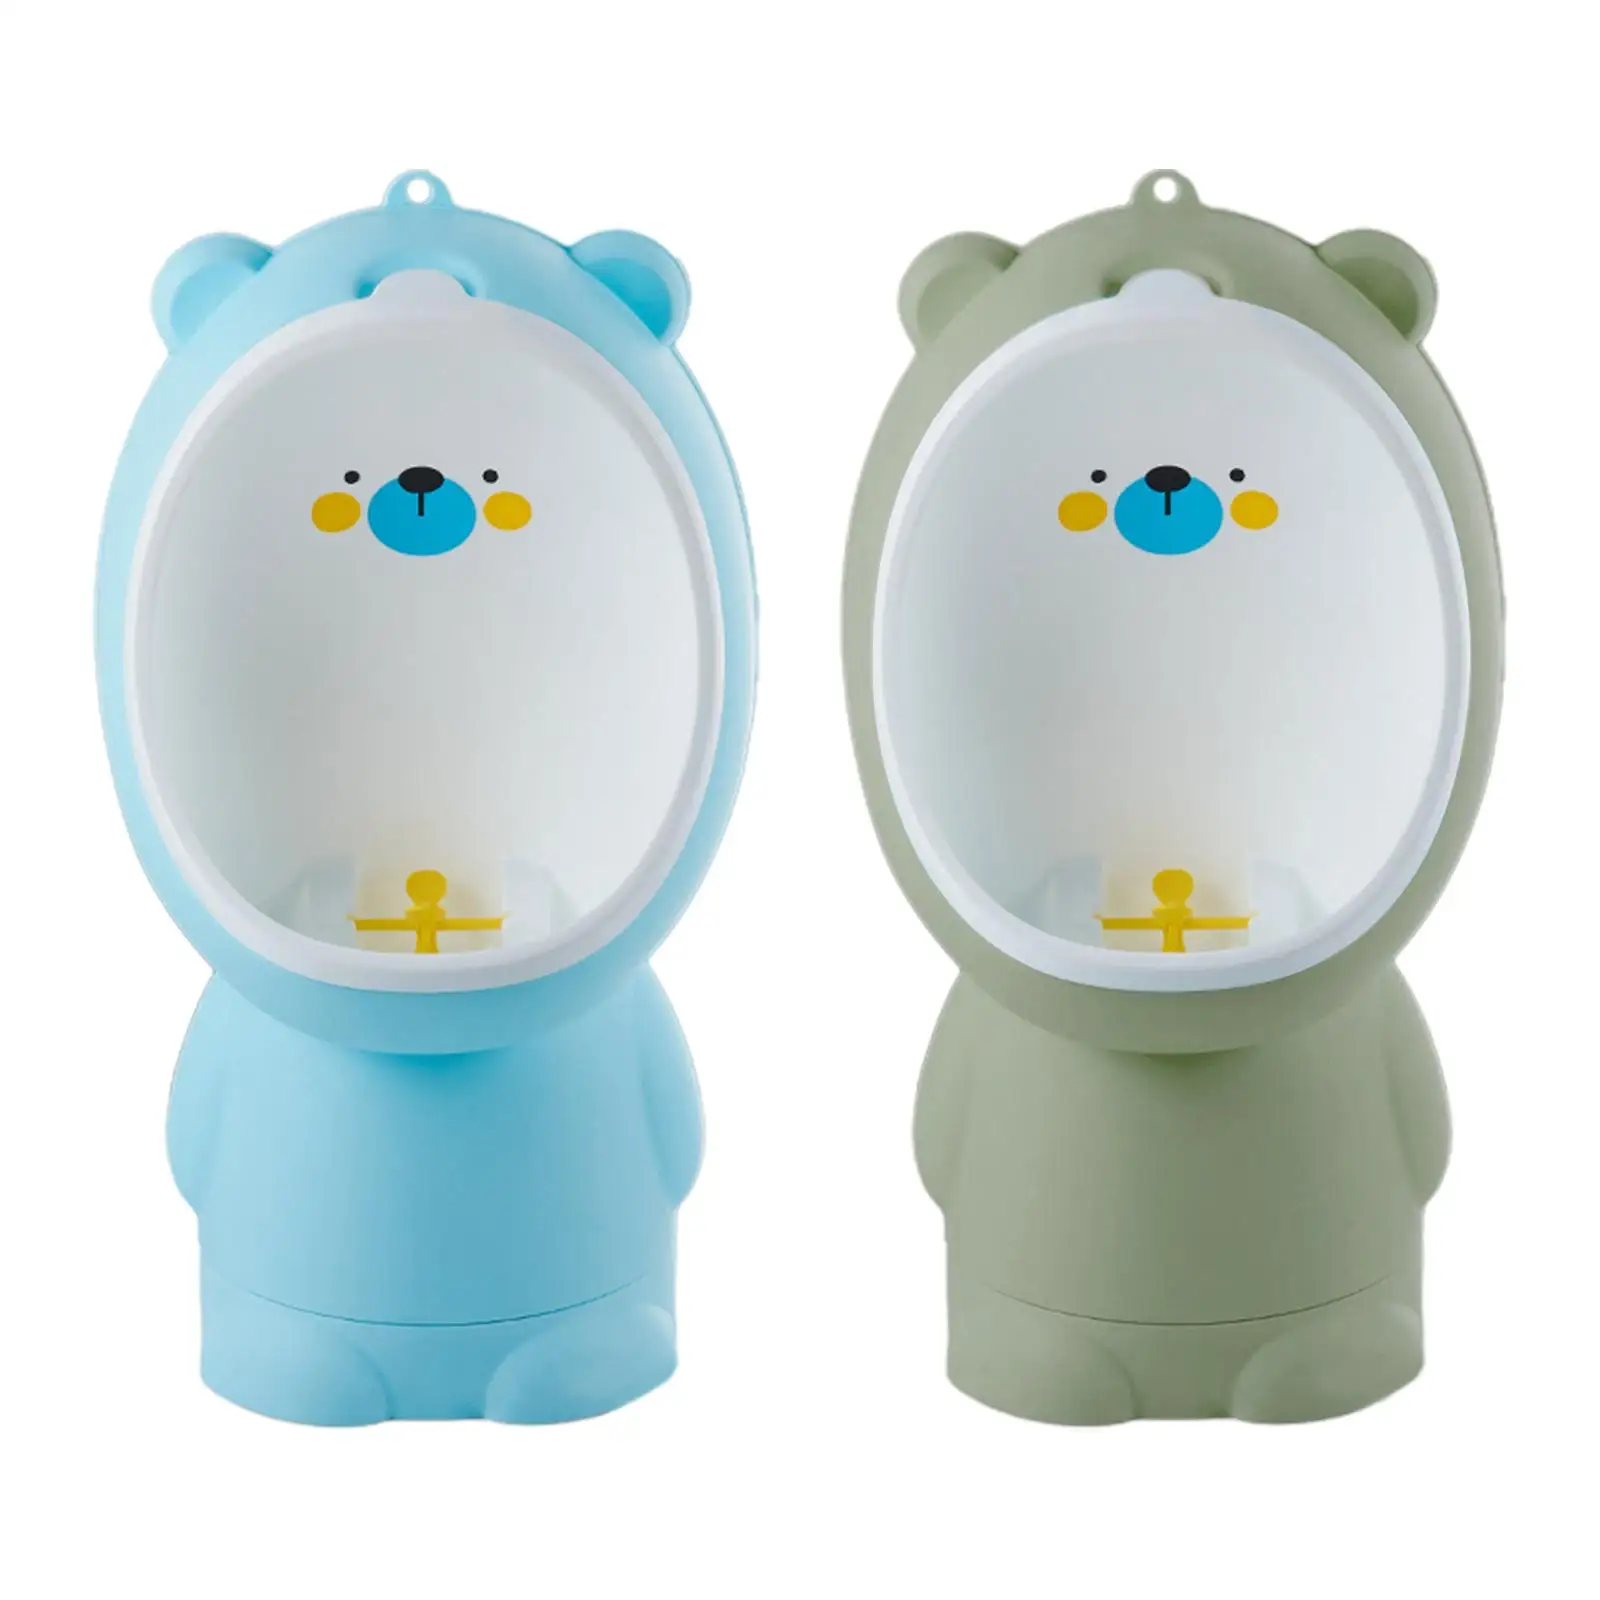 

Urinals Toilet Training Standing Potty Cute Bear Potty Trainer Urinal Urinal Pee Trainer for Baby Kids Toddlers Boys Child